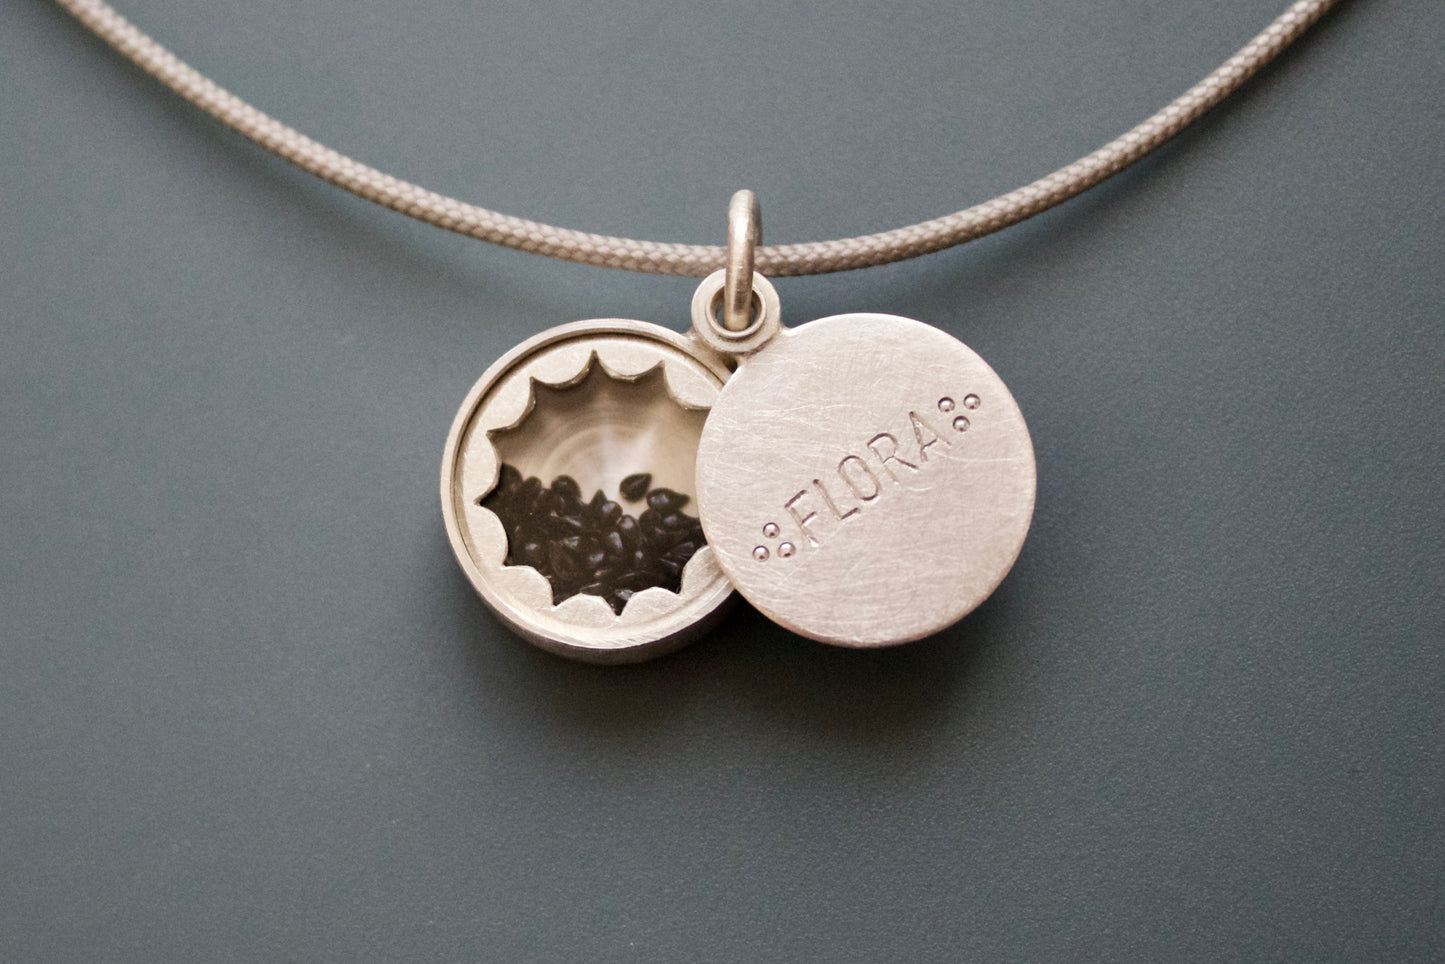 silver floating locket with custom name with forget me not seeds